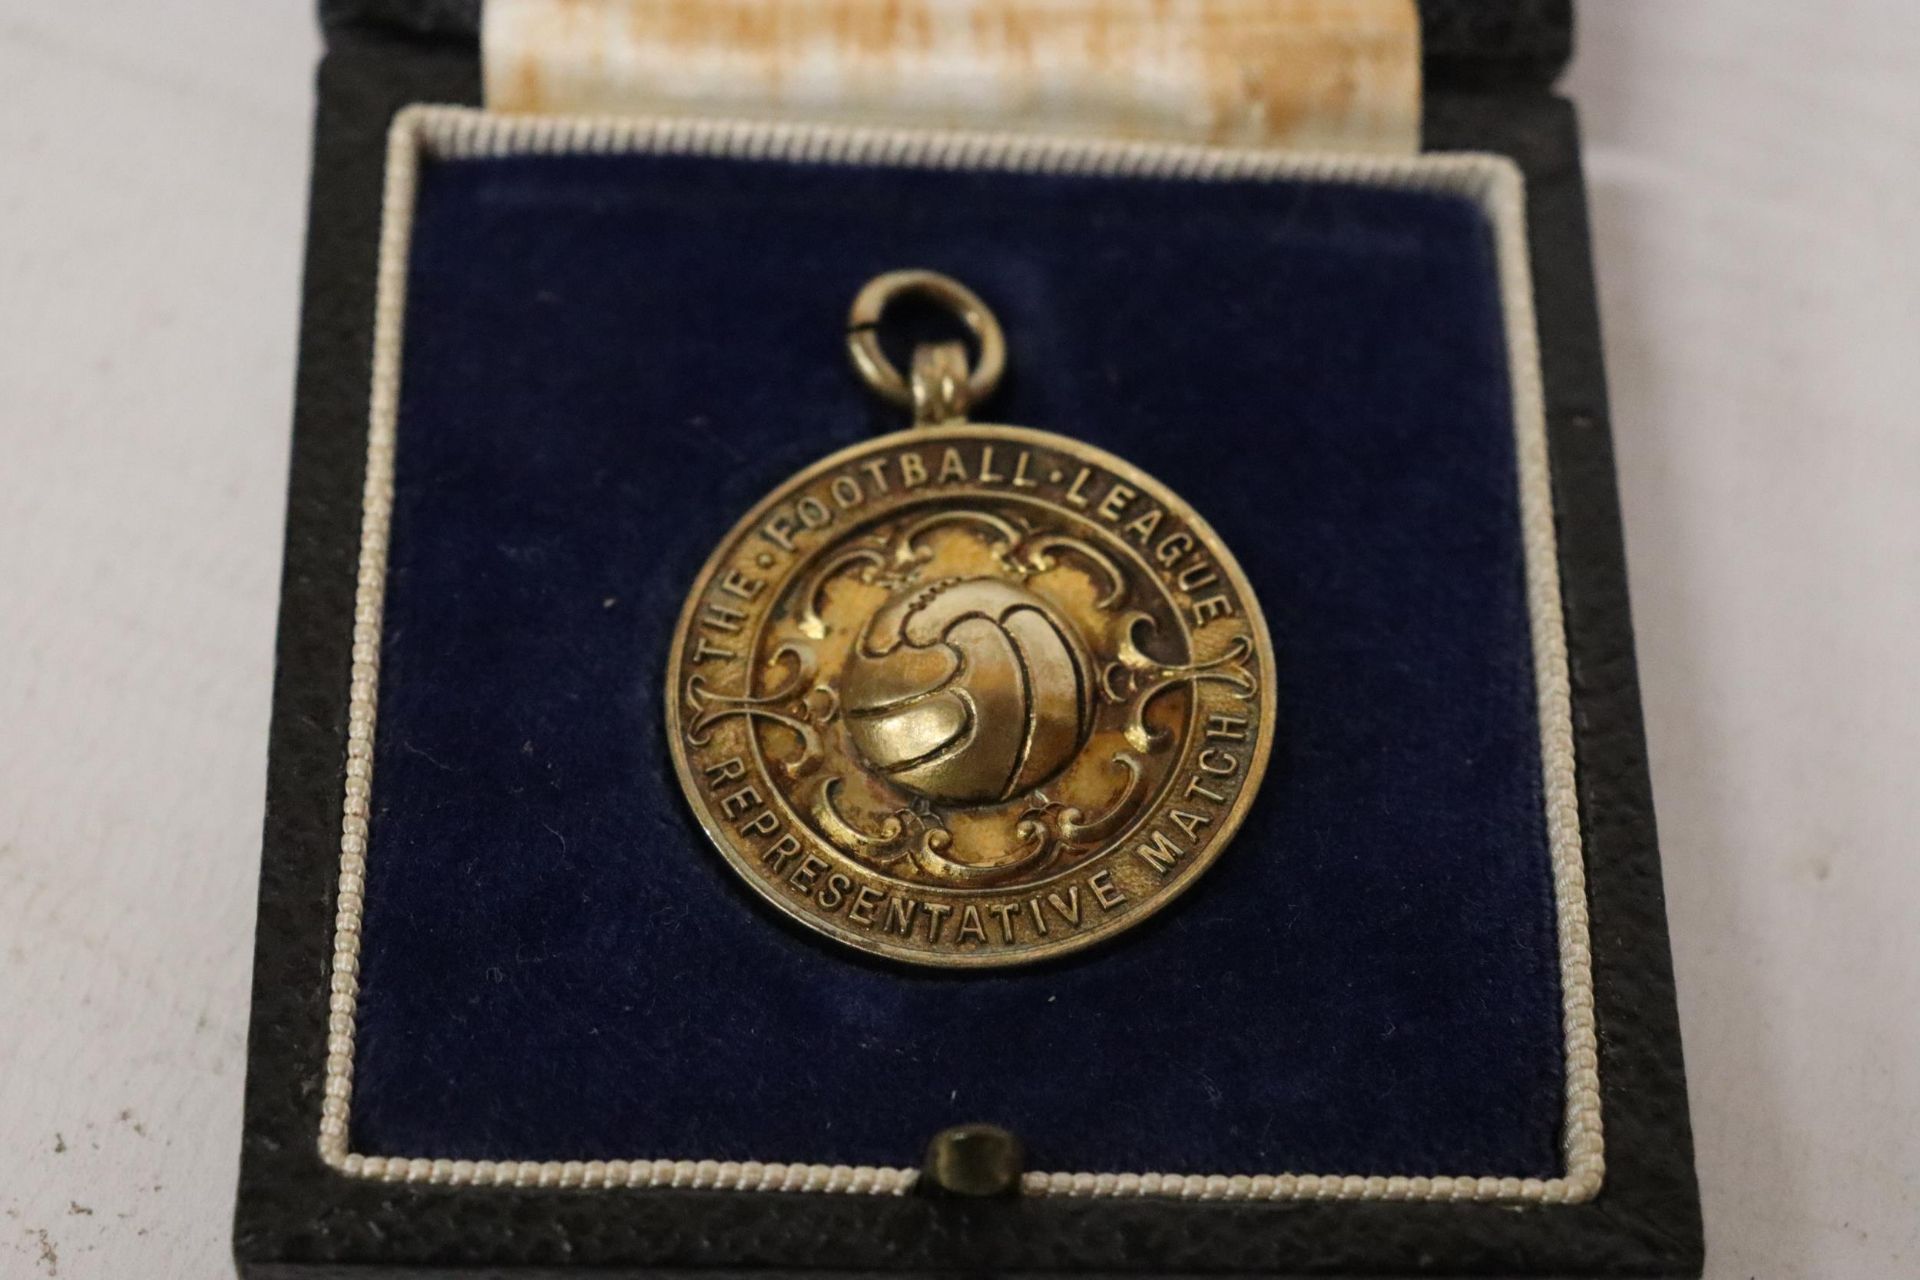 A BIRMINGHAM HALLMARKED SILVER 'THE FOOTBALL LEAGUE REPRESENTITIVE MATCH' MEDAL PRESENTED TO A - Image 4 of 5